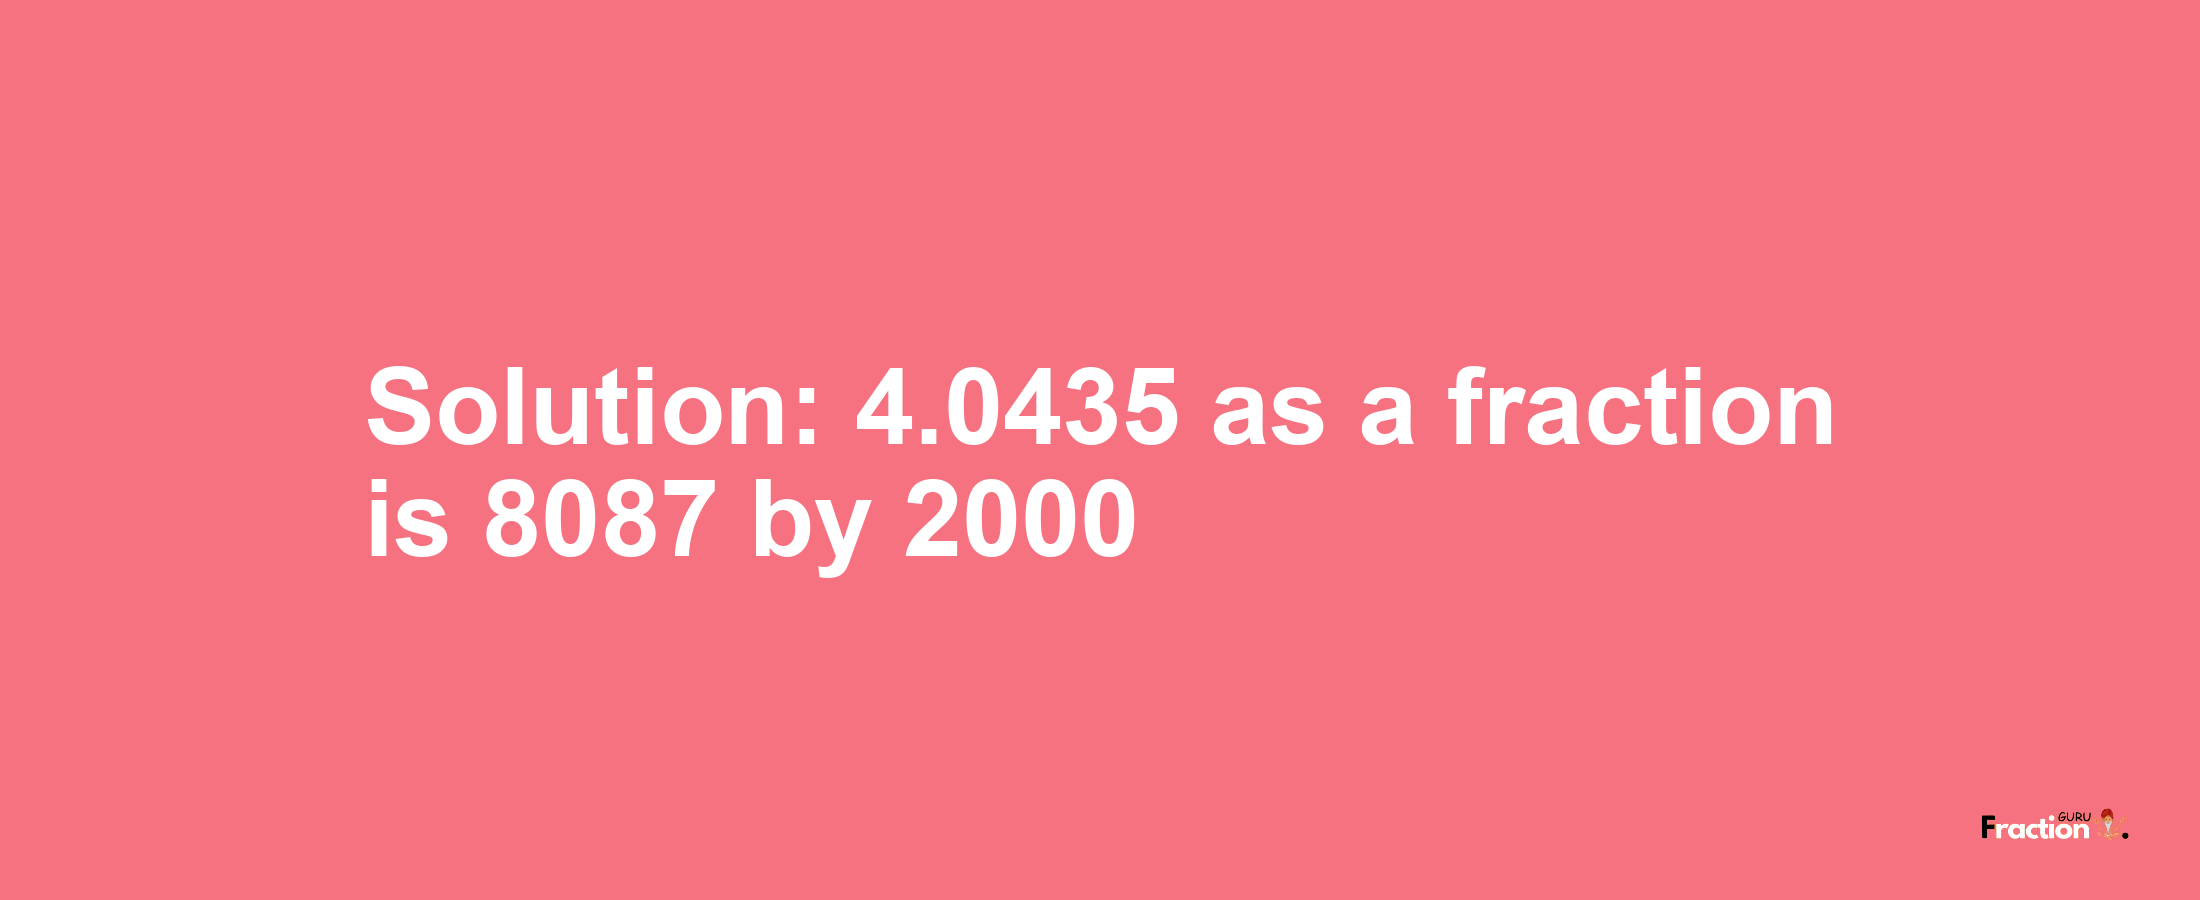 Solution:4.0435 as a fraction is 8087/2000